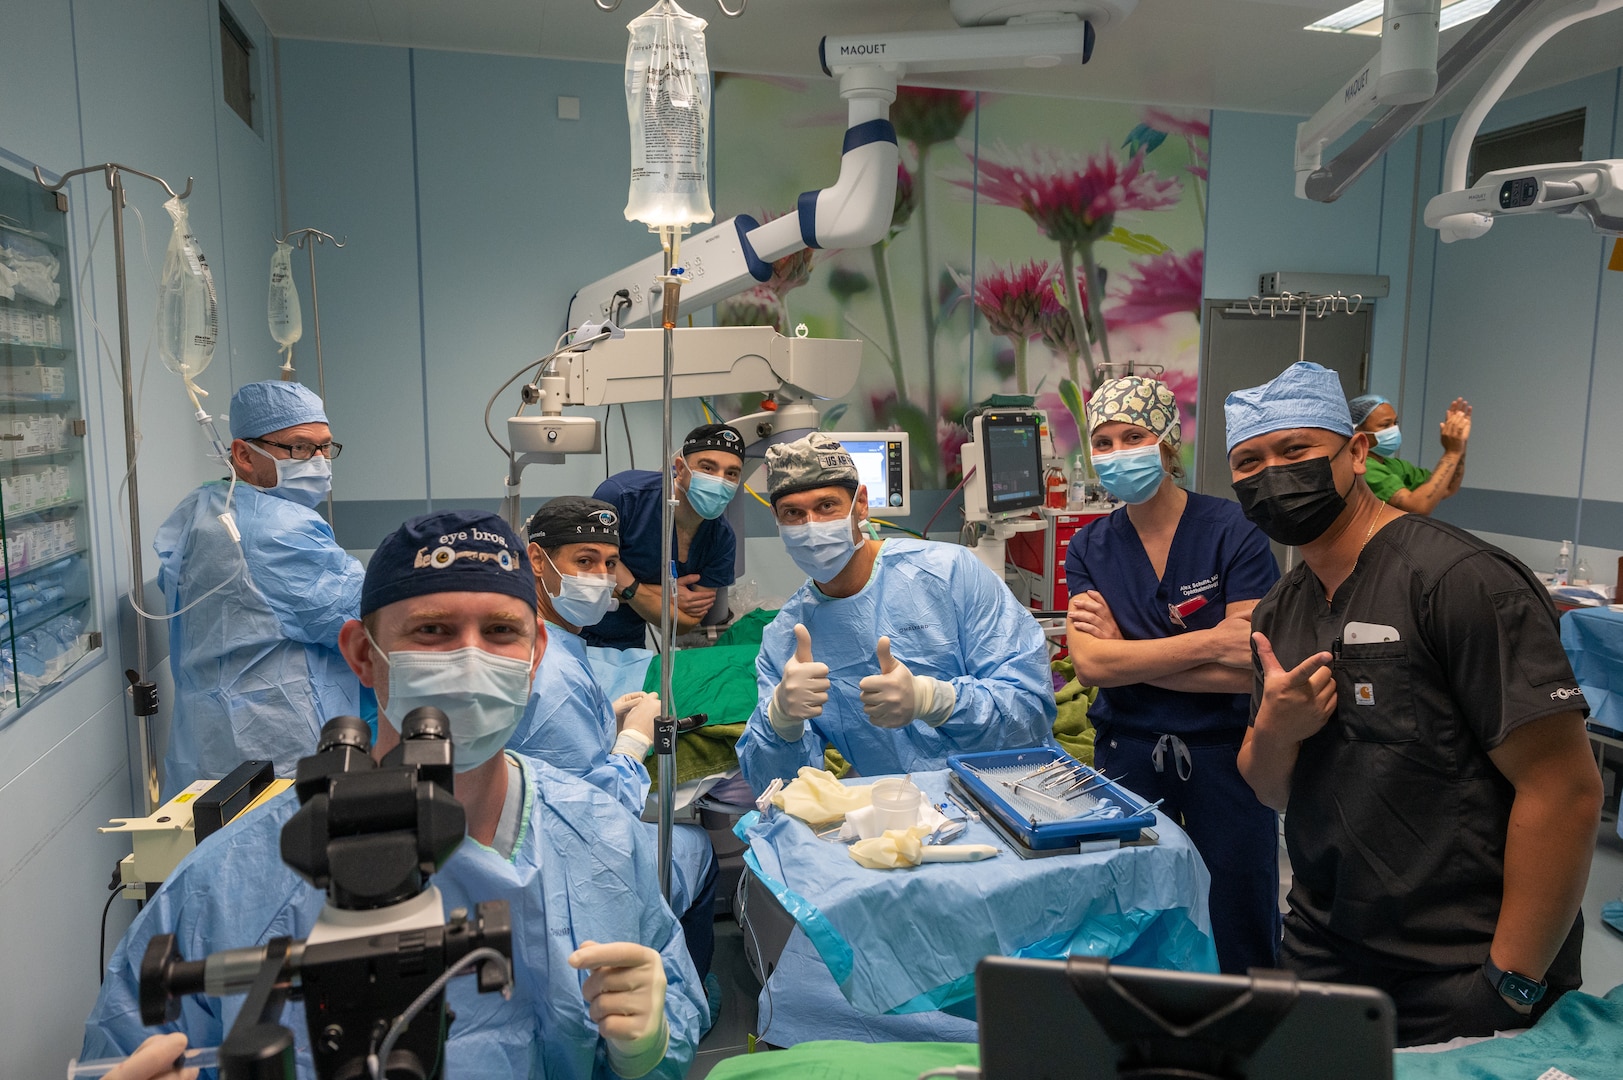 A group photo of ophthalmologists and medical technicians in one of three operating rooms where a manual small incision cataract surgery and pterygium excision are being performed.